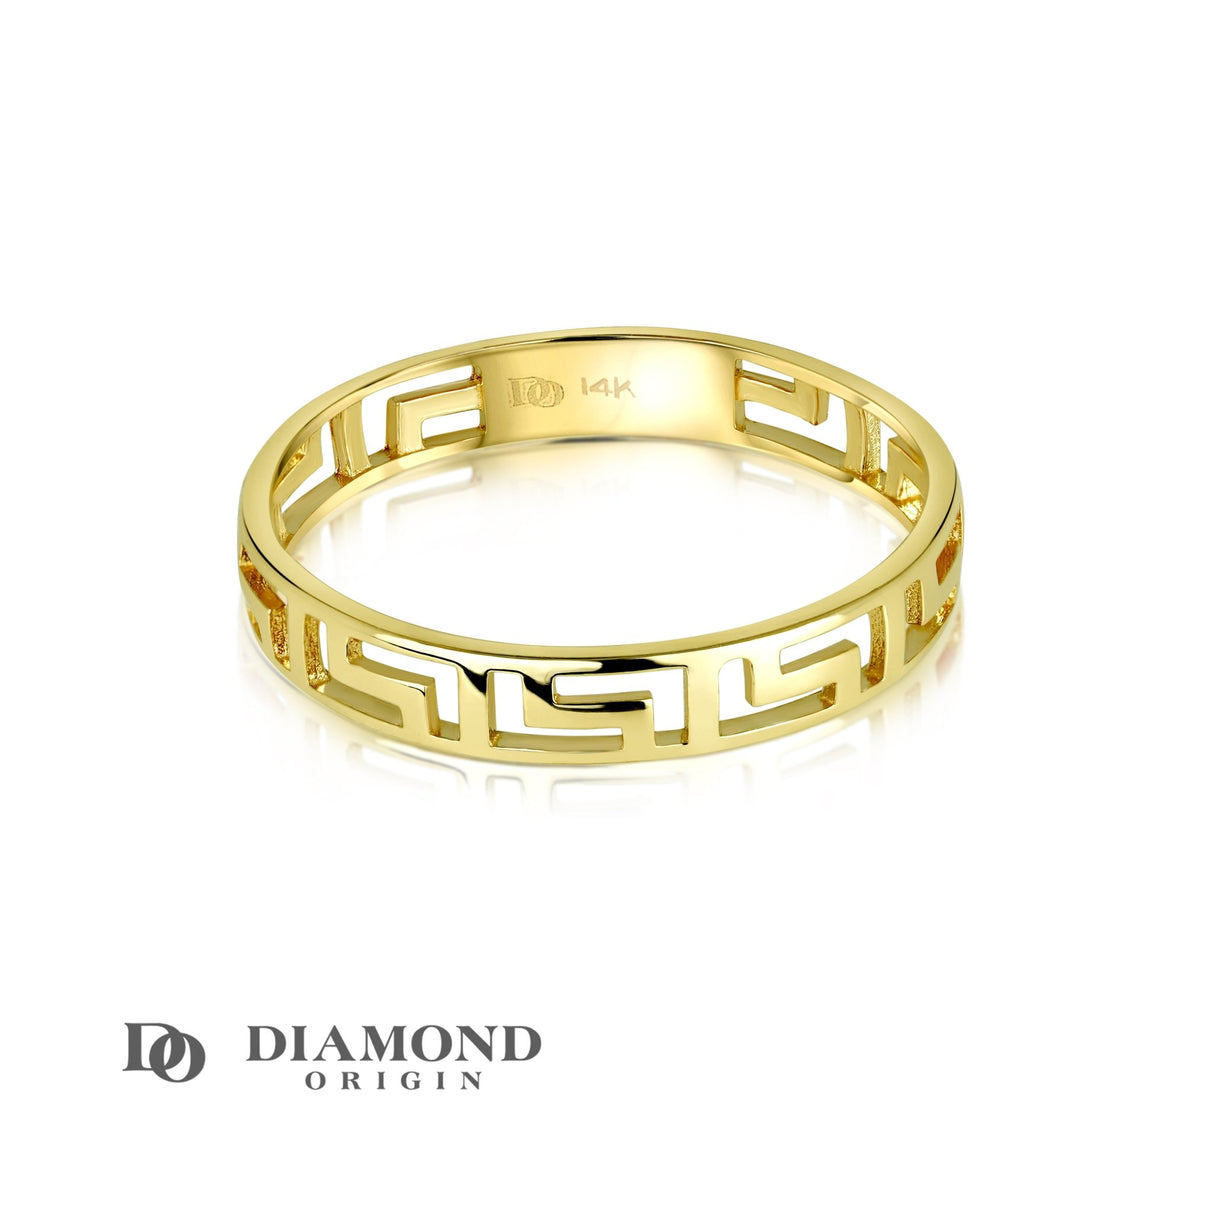 The 14kt Greek Gold Band beautifully reflects the brand's commitment to timeless elegance, craftsmanship and unique design. Featuring an enduring Greek motif, this stackable gold ring is a stunning combination of ancient symbolism and contemporary style.